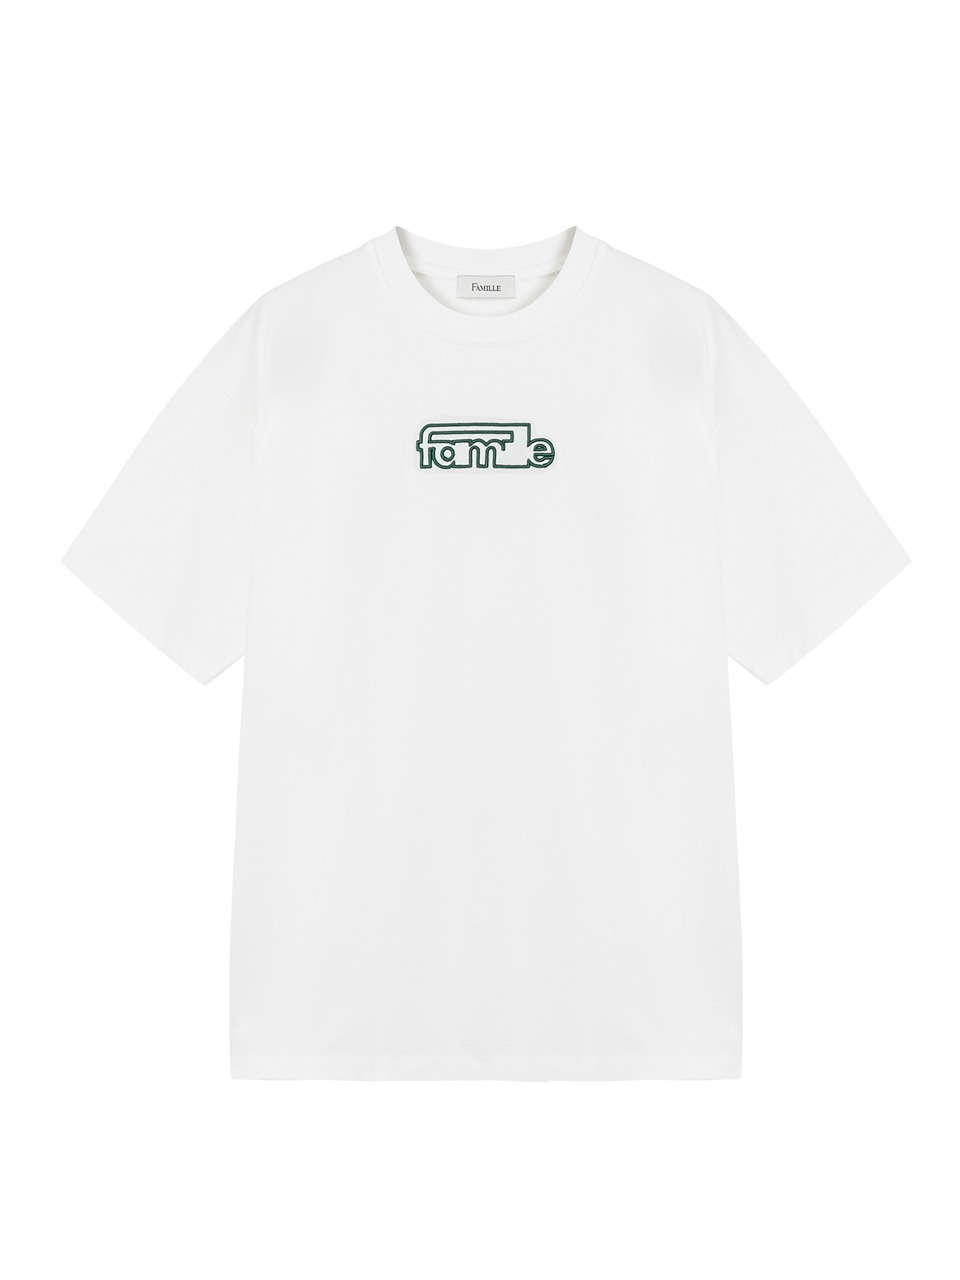 FAMILLE - LINKED EMBROIDERY LOGO T-SHIRT (WHITE)